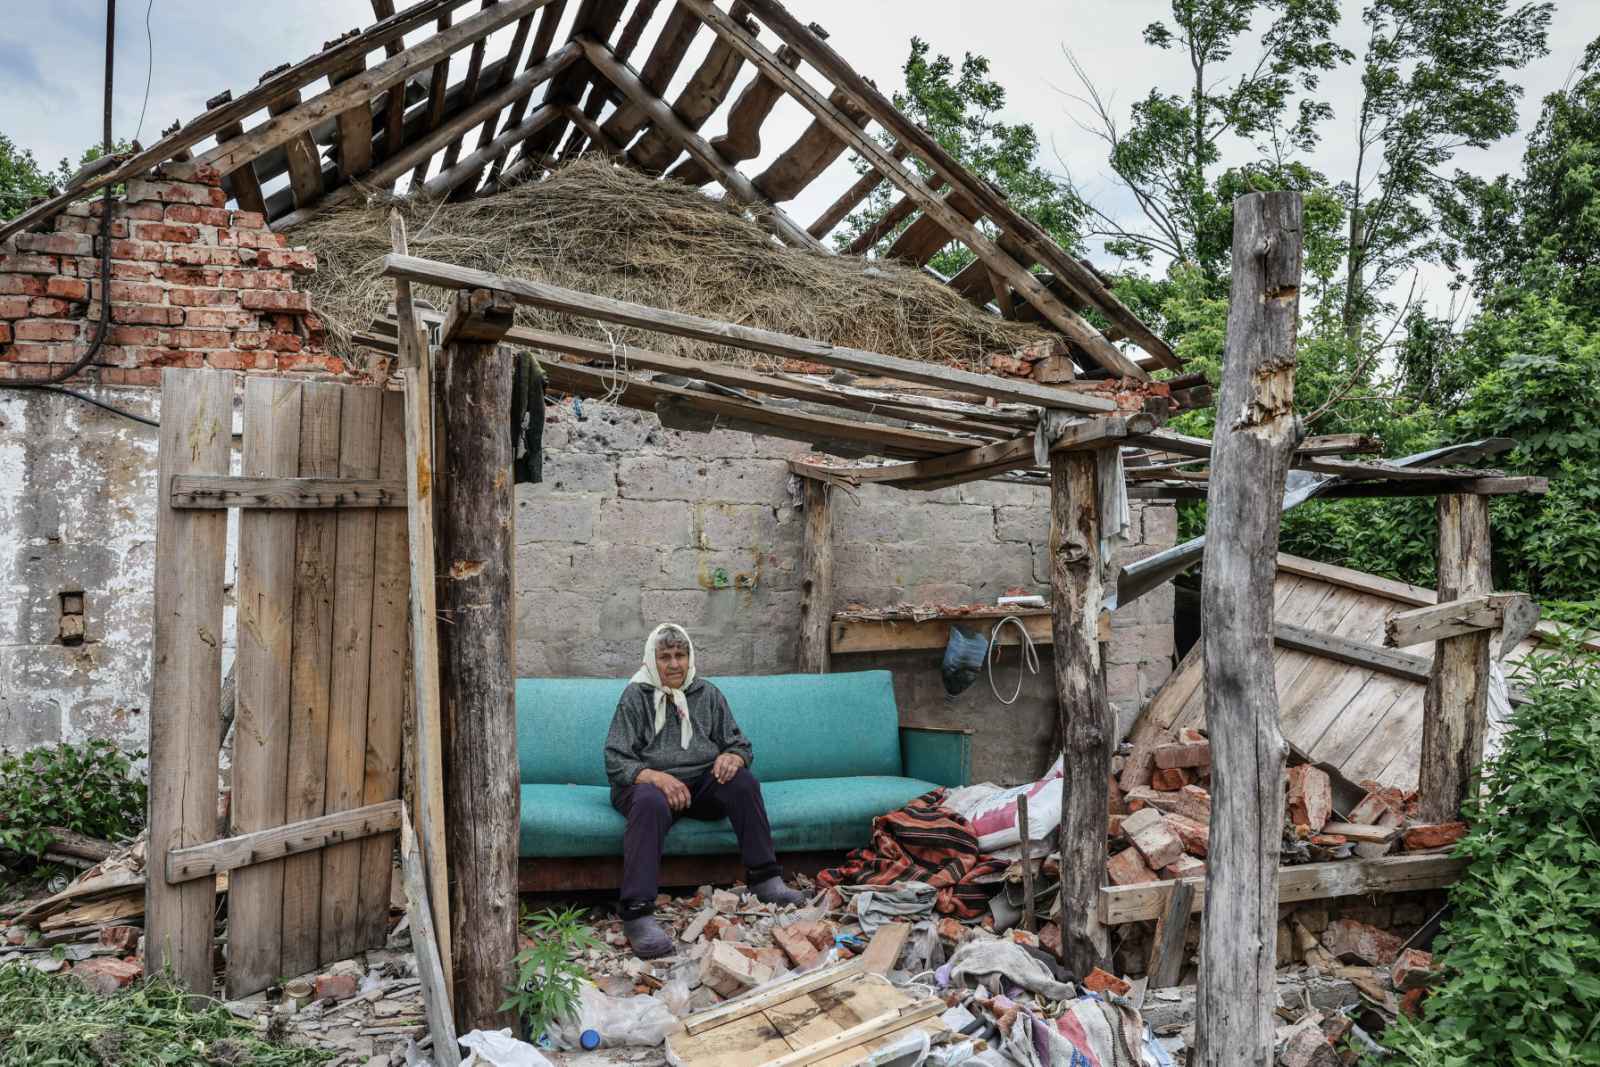 An elderly Ukrainian woman sit on a blue couch in the wreckage of her destroyed home